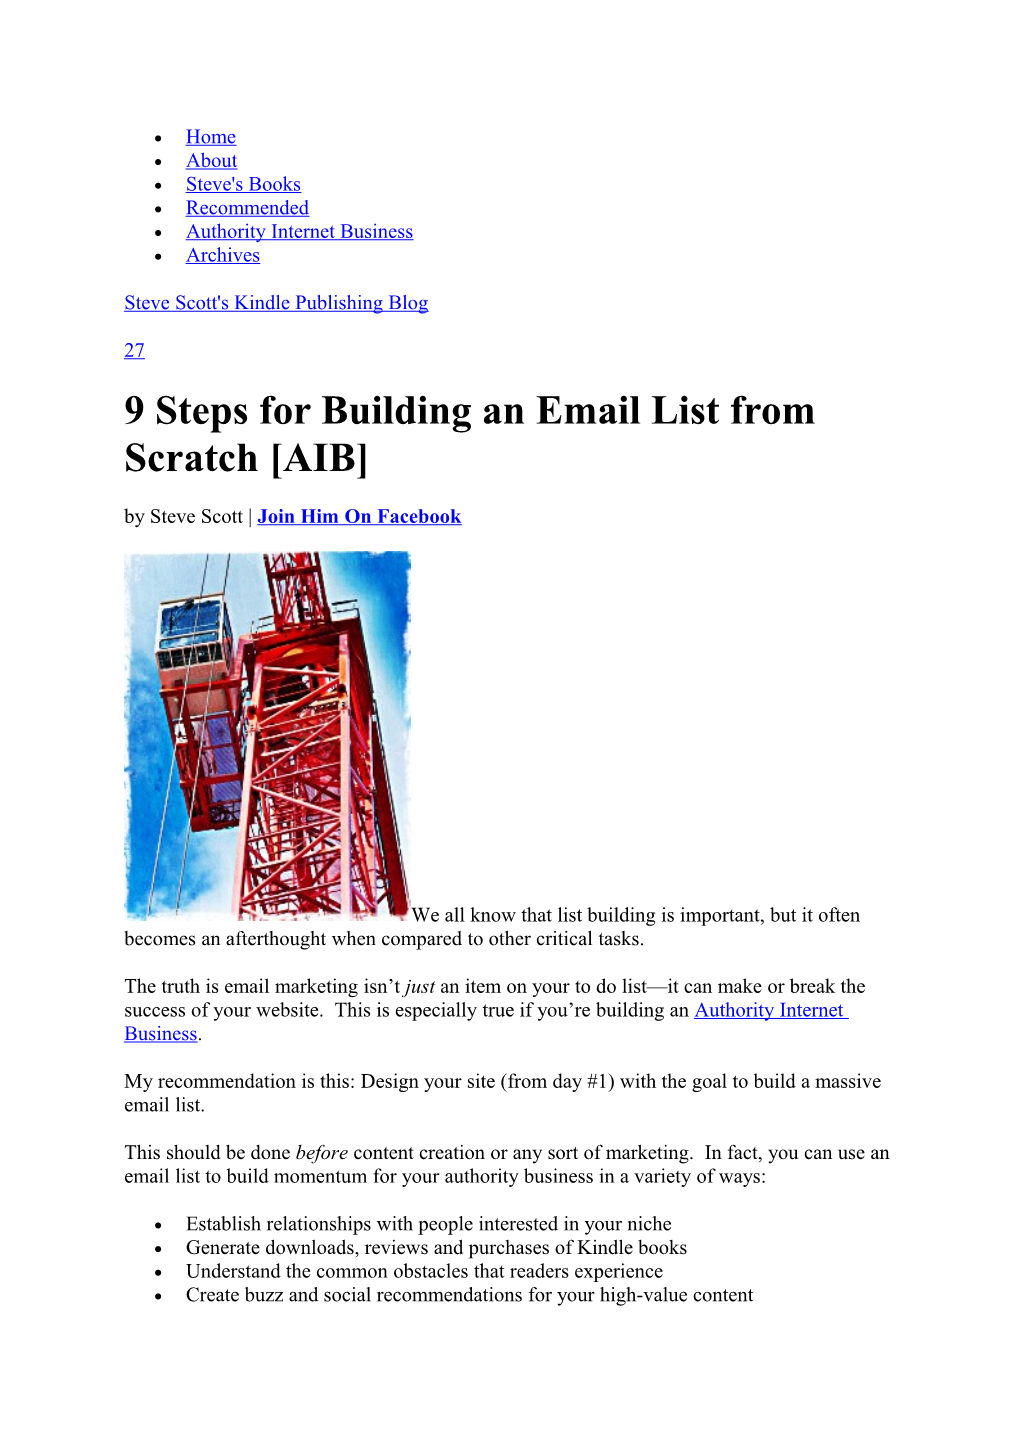 9 Steps for Building an Email List from Scratch AIB